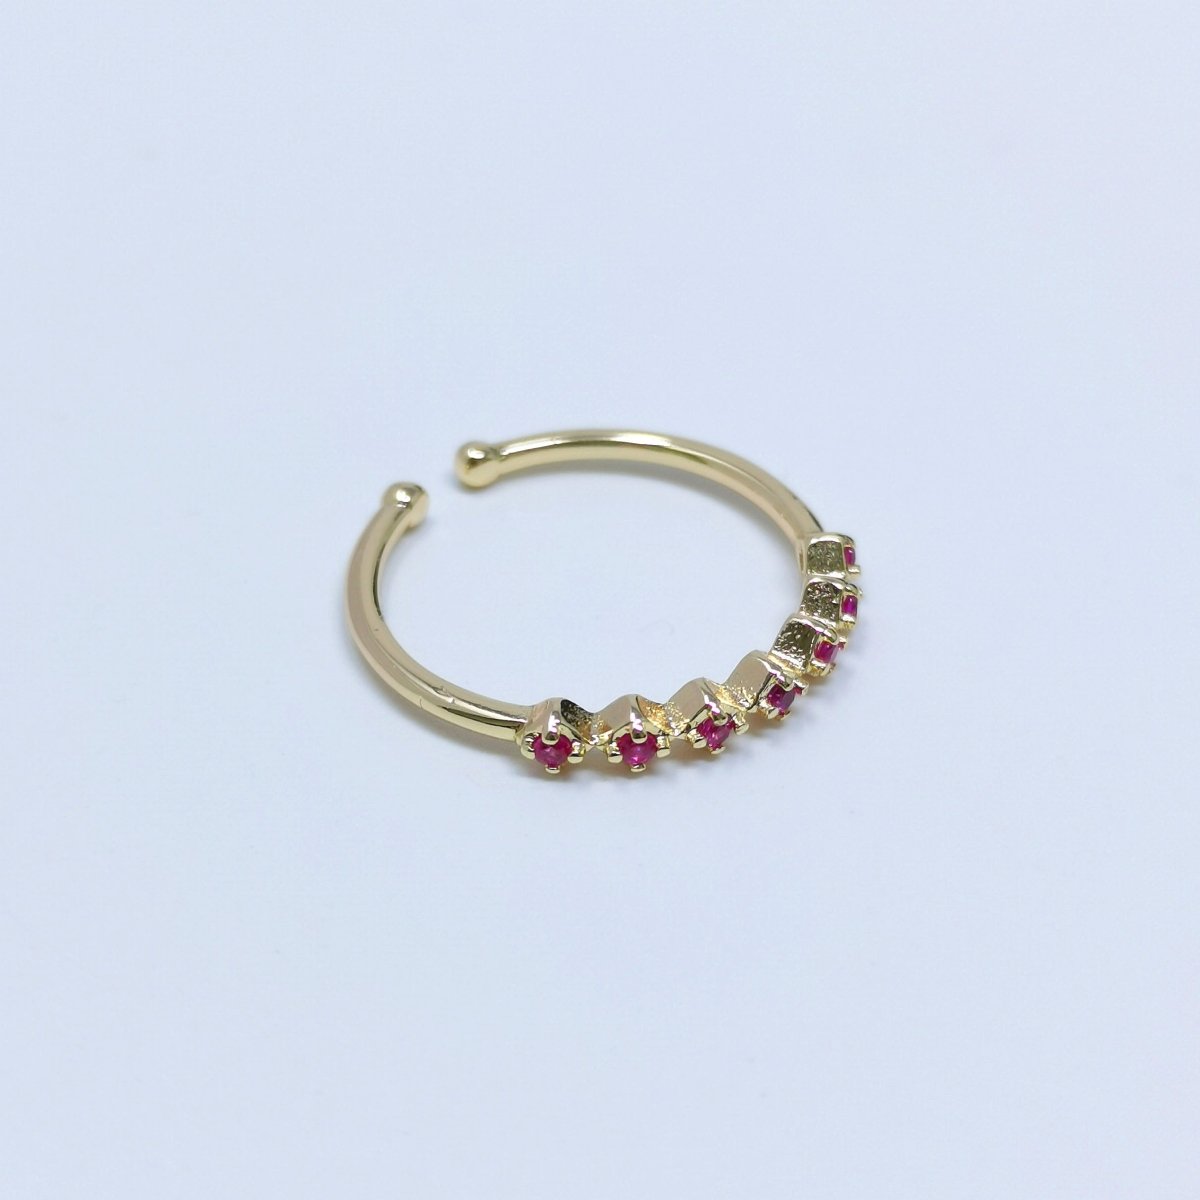 Dainty Rings For Women Crystal Ring Gold Rings Cubic Ring Stackable Ring Bridesmaid Gift Minimalist Rings Claer Pink Blu Green Cz Ring R-231 R-236 R-237 R-240 - DLUXCA